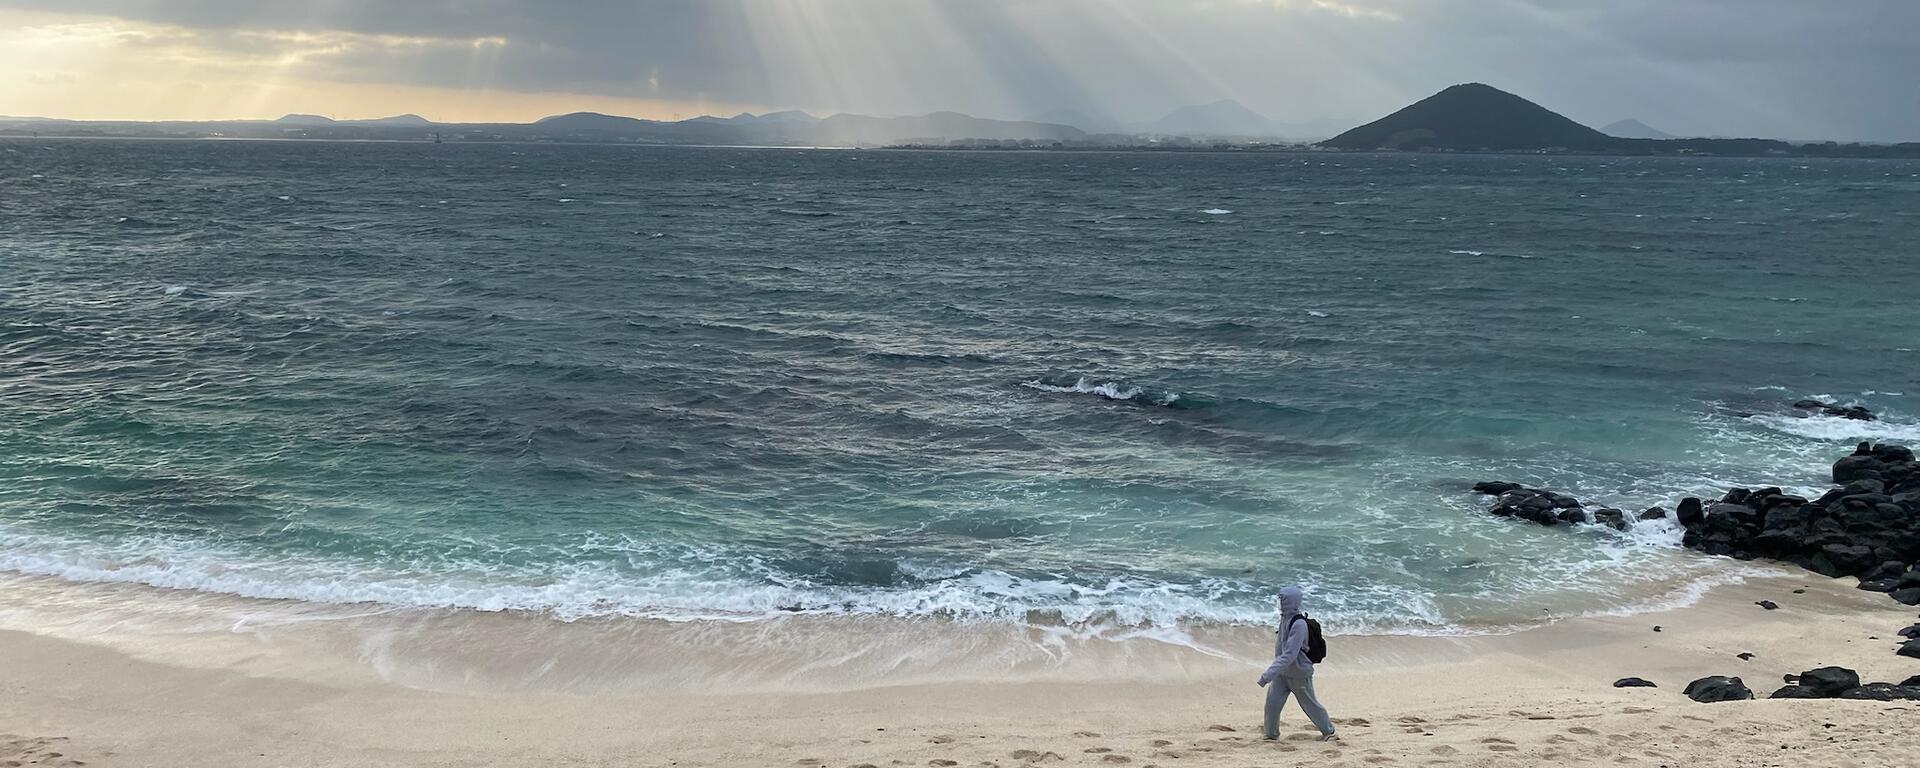 Looking down on a beach with stormy grey water. Sun rays illuminate the waves. A person walks through the sand. There is an island visible in the distant right.